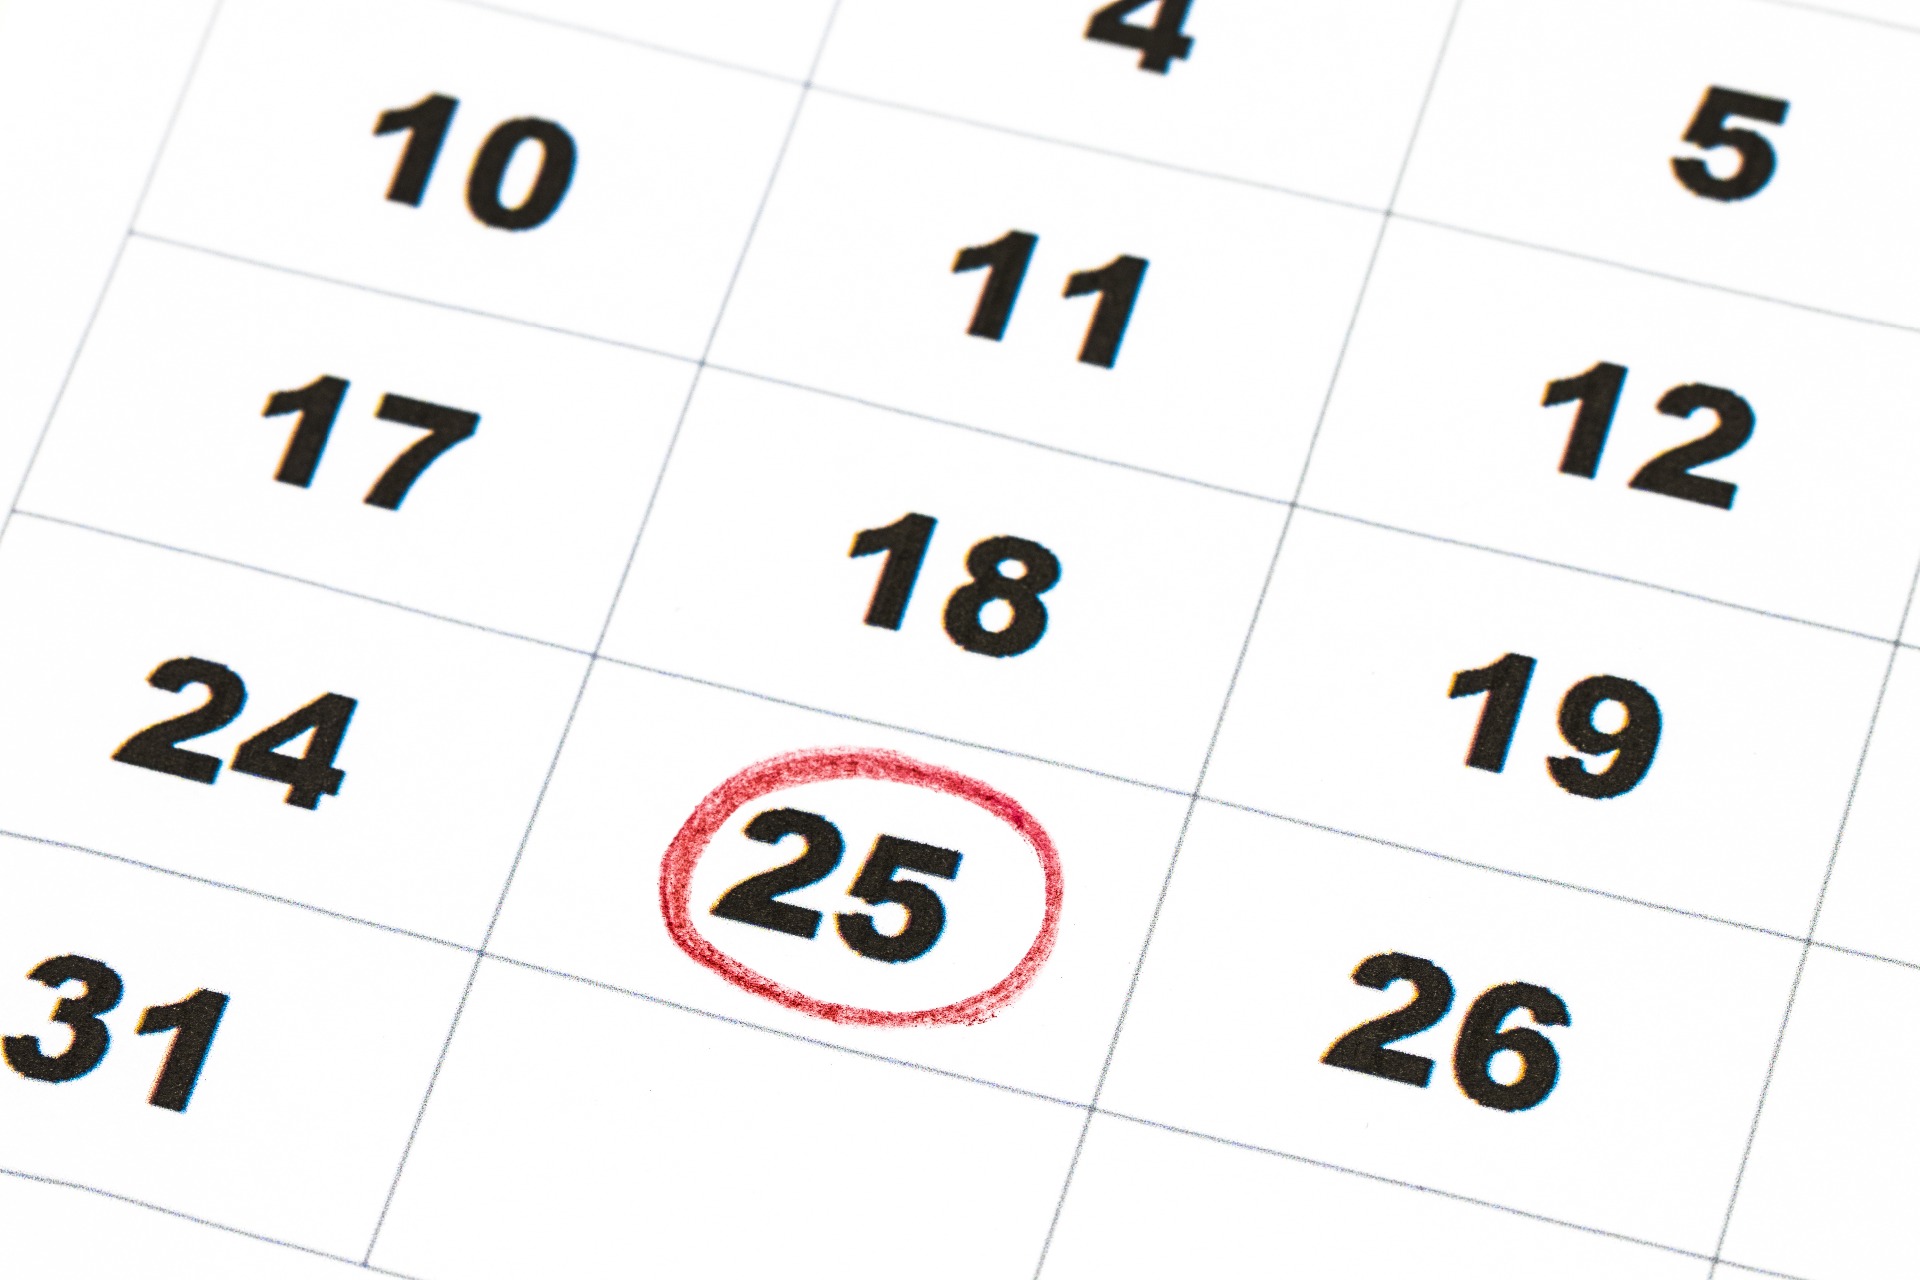 A calendar showing the day 25 circled in red; our Conveyancing Solicitors in Preston discuss the CML 6 month rule.